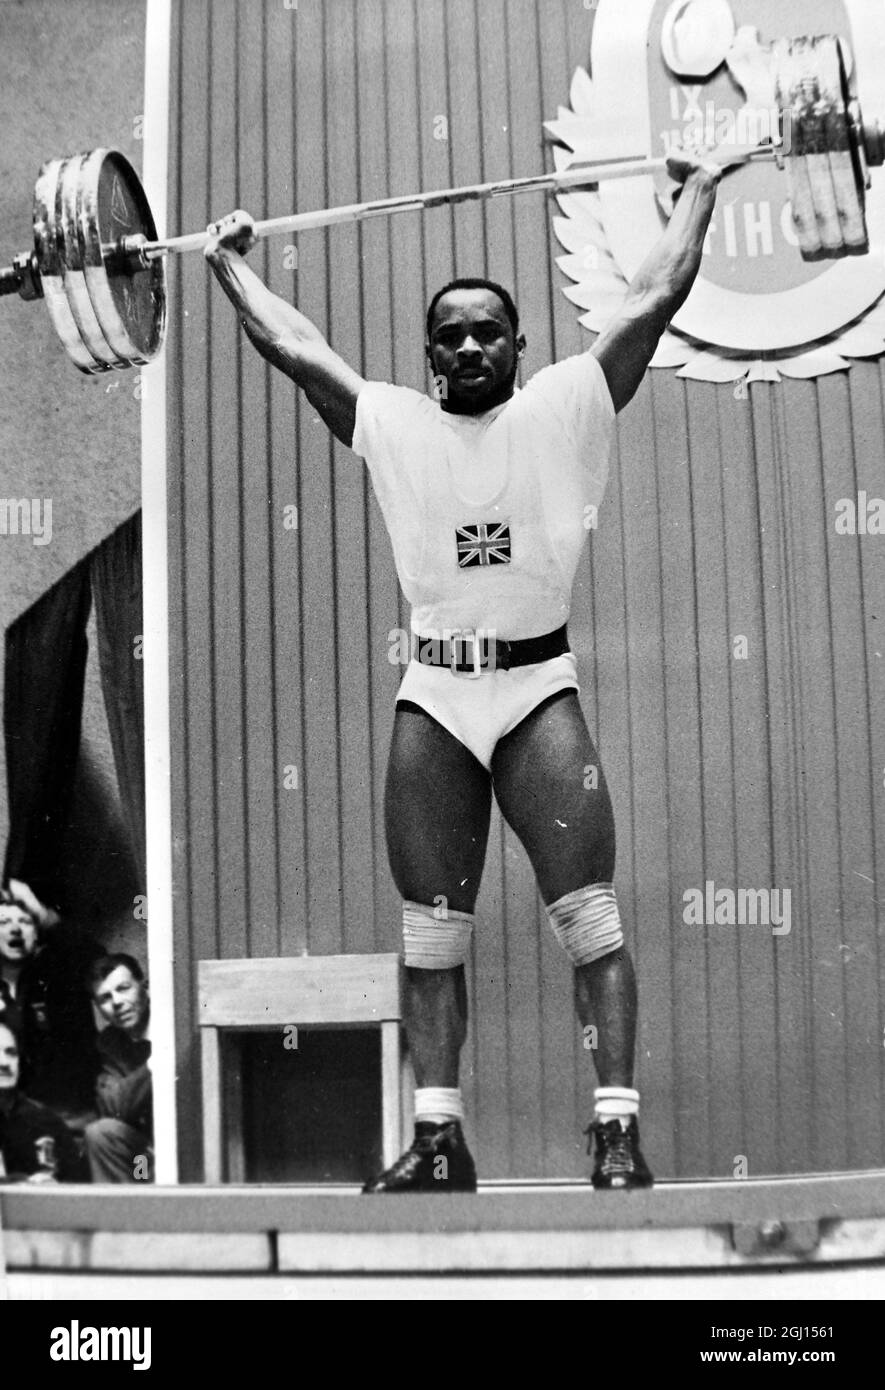 MARTIN OF BRITAIN IN ACTION AT EUROPEAN WEIGHTLIFTING CHAMPIONSHIPS IN BUDAPEST ; 24 SEPTEMBER 1962 Stock Photo